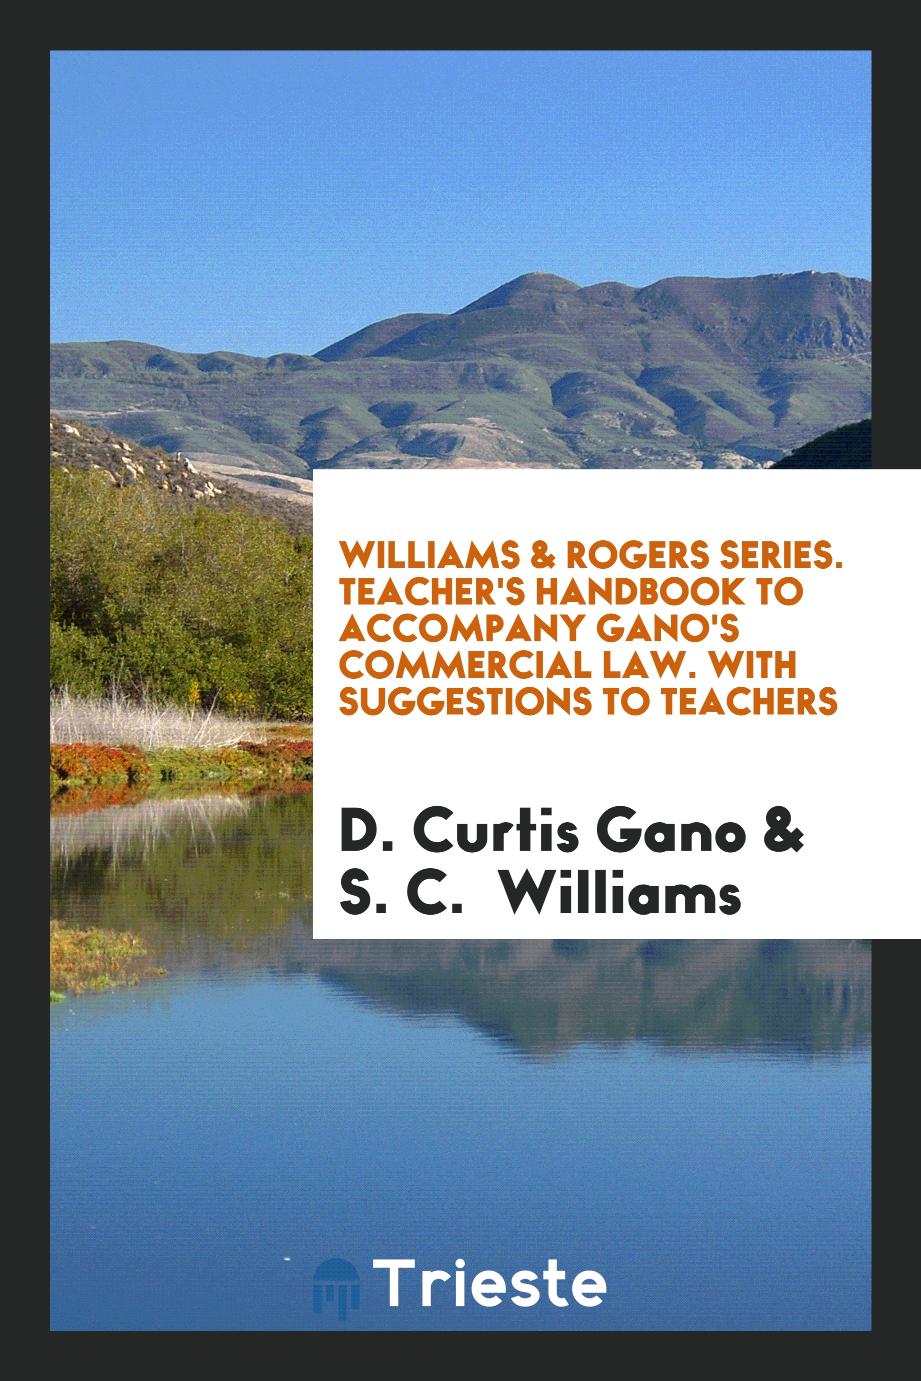 Williams & Rogers Series. Teacher's Handbook to Accompany Gano's Commercial Law. With Suggestions to Teachers